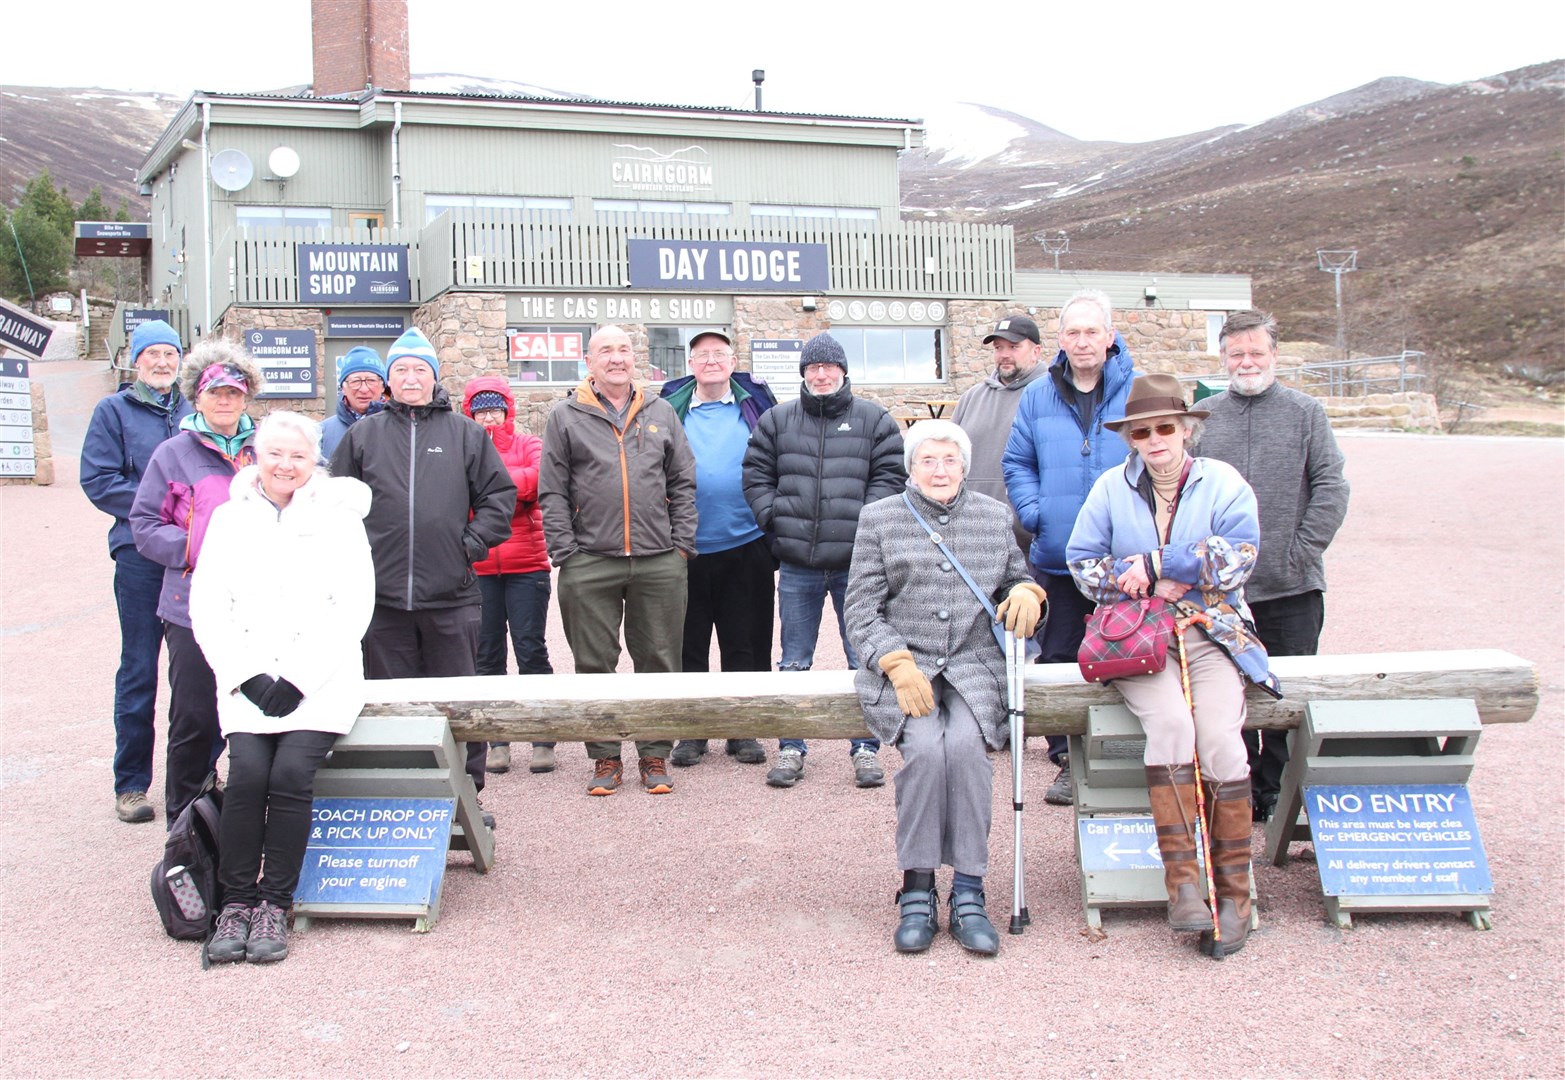 The group who turned out last night at Cairngorm Mountain to show their frustration over HIE's management of Cairngorm Mountain.